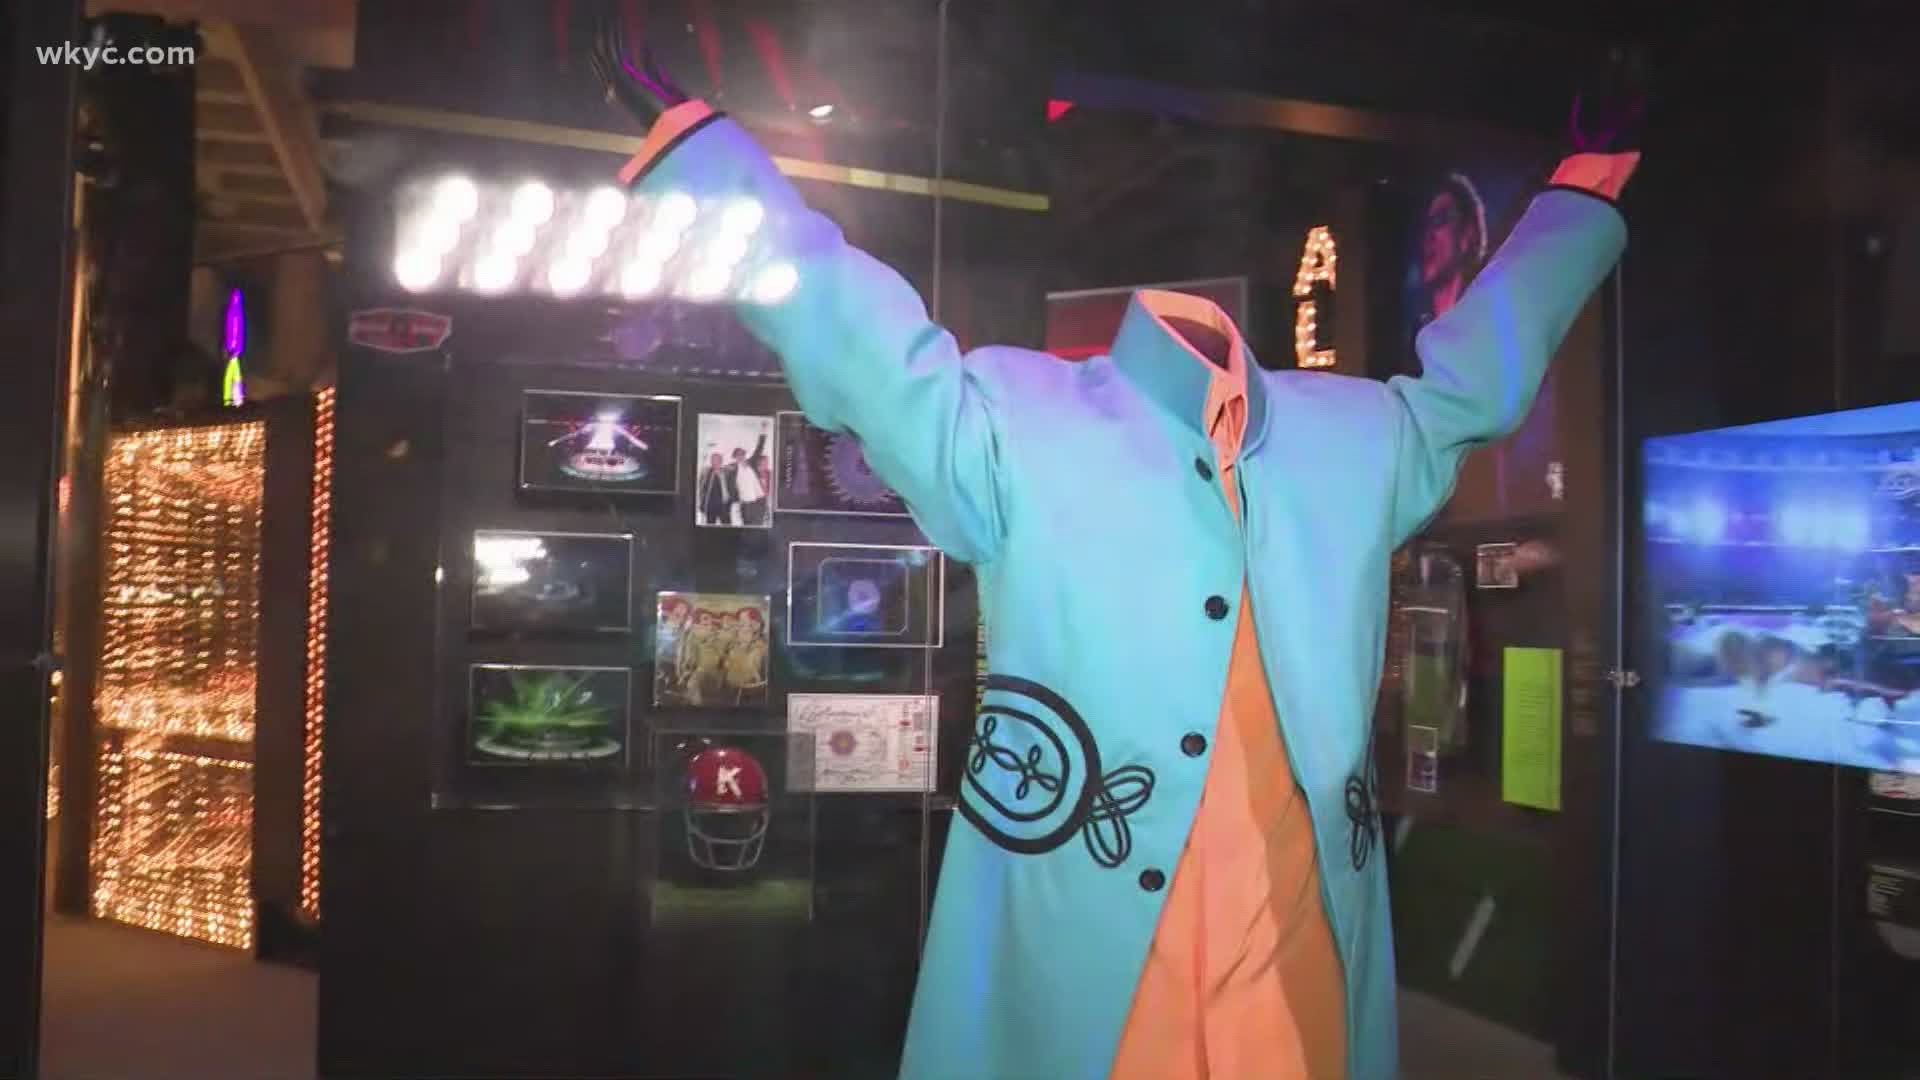 Take a behind the scenes look at the new Rock Hall exhibit showcasing 55 years of Super Bowl halftime shows. Will Ujek reports.